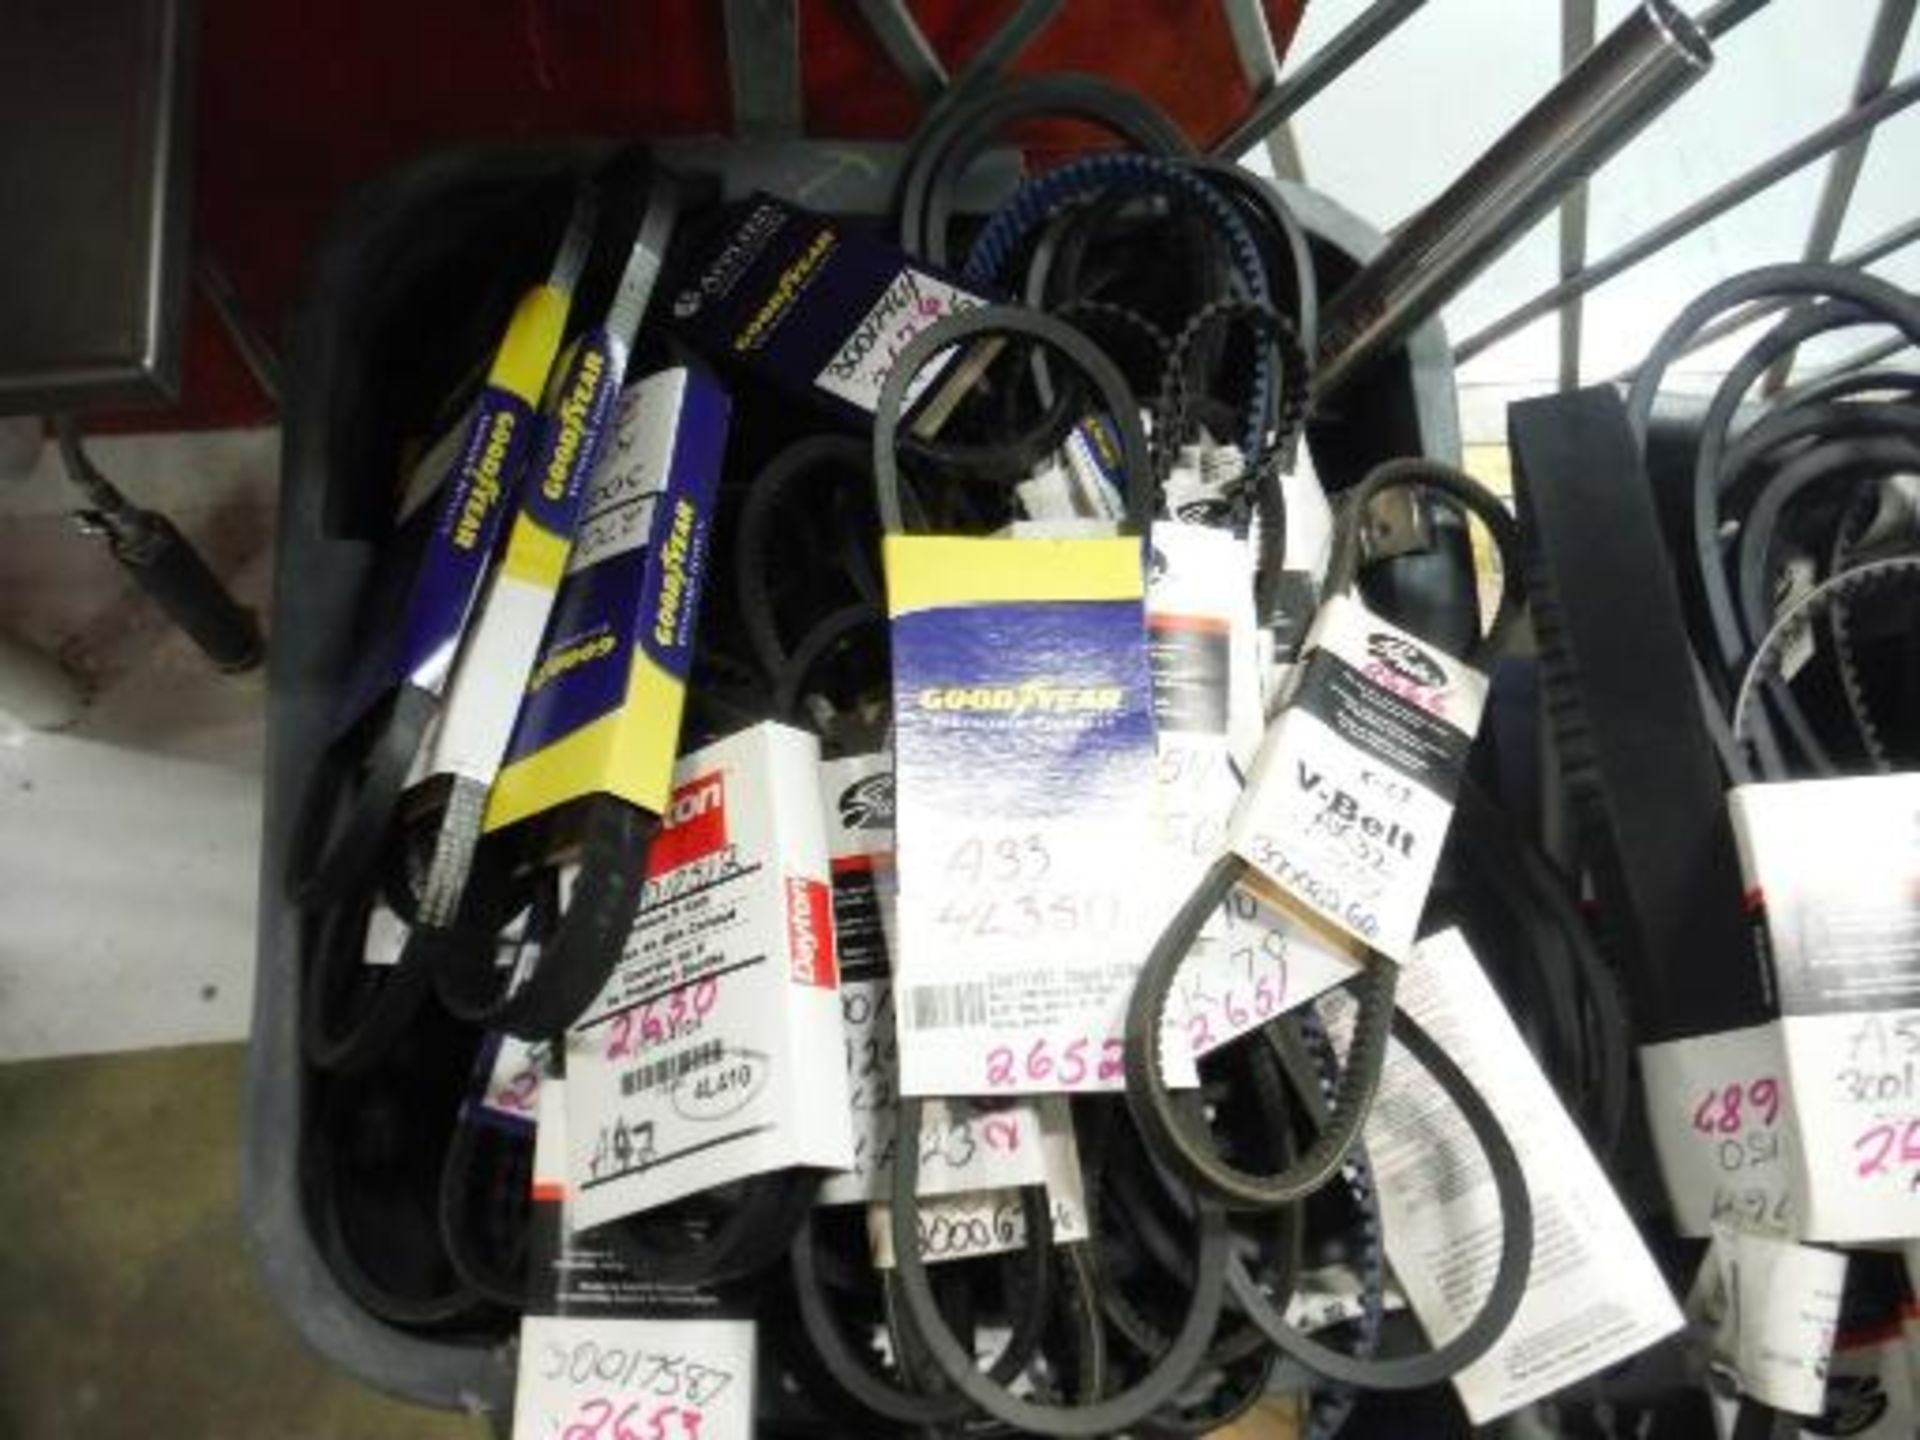 Lot of New assorted V-belts, and light bulbs. Located in Marion, Ohio Rigging Fee: $25 - Image 2 of 3